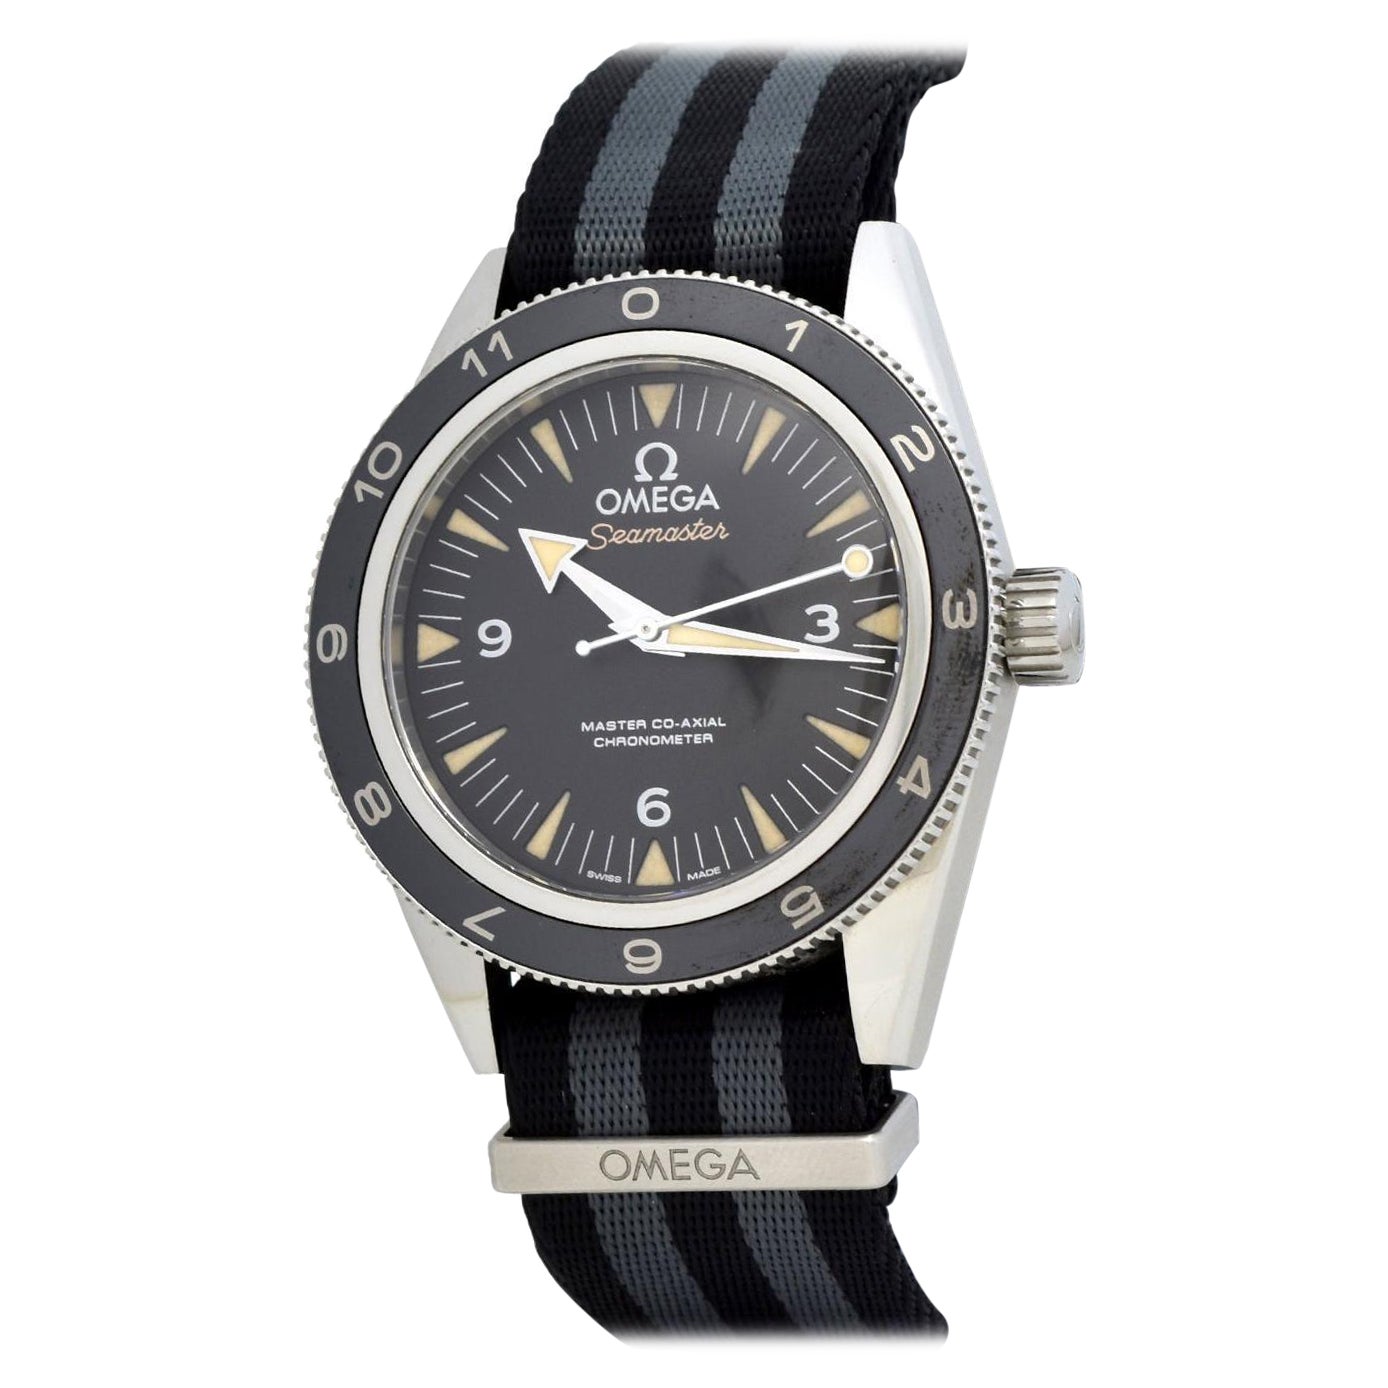 Omega Seamaster 300 Master Co-Axial „specTRE“ Limitierte Auflage